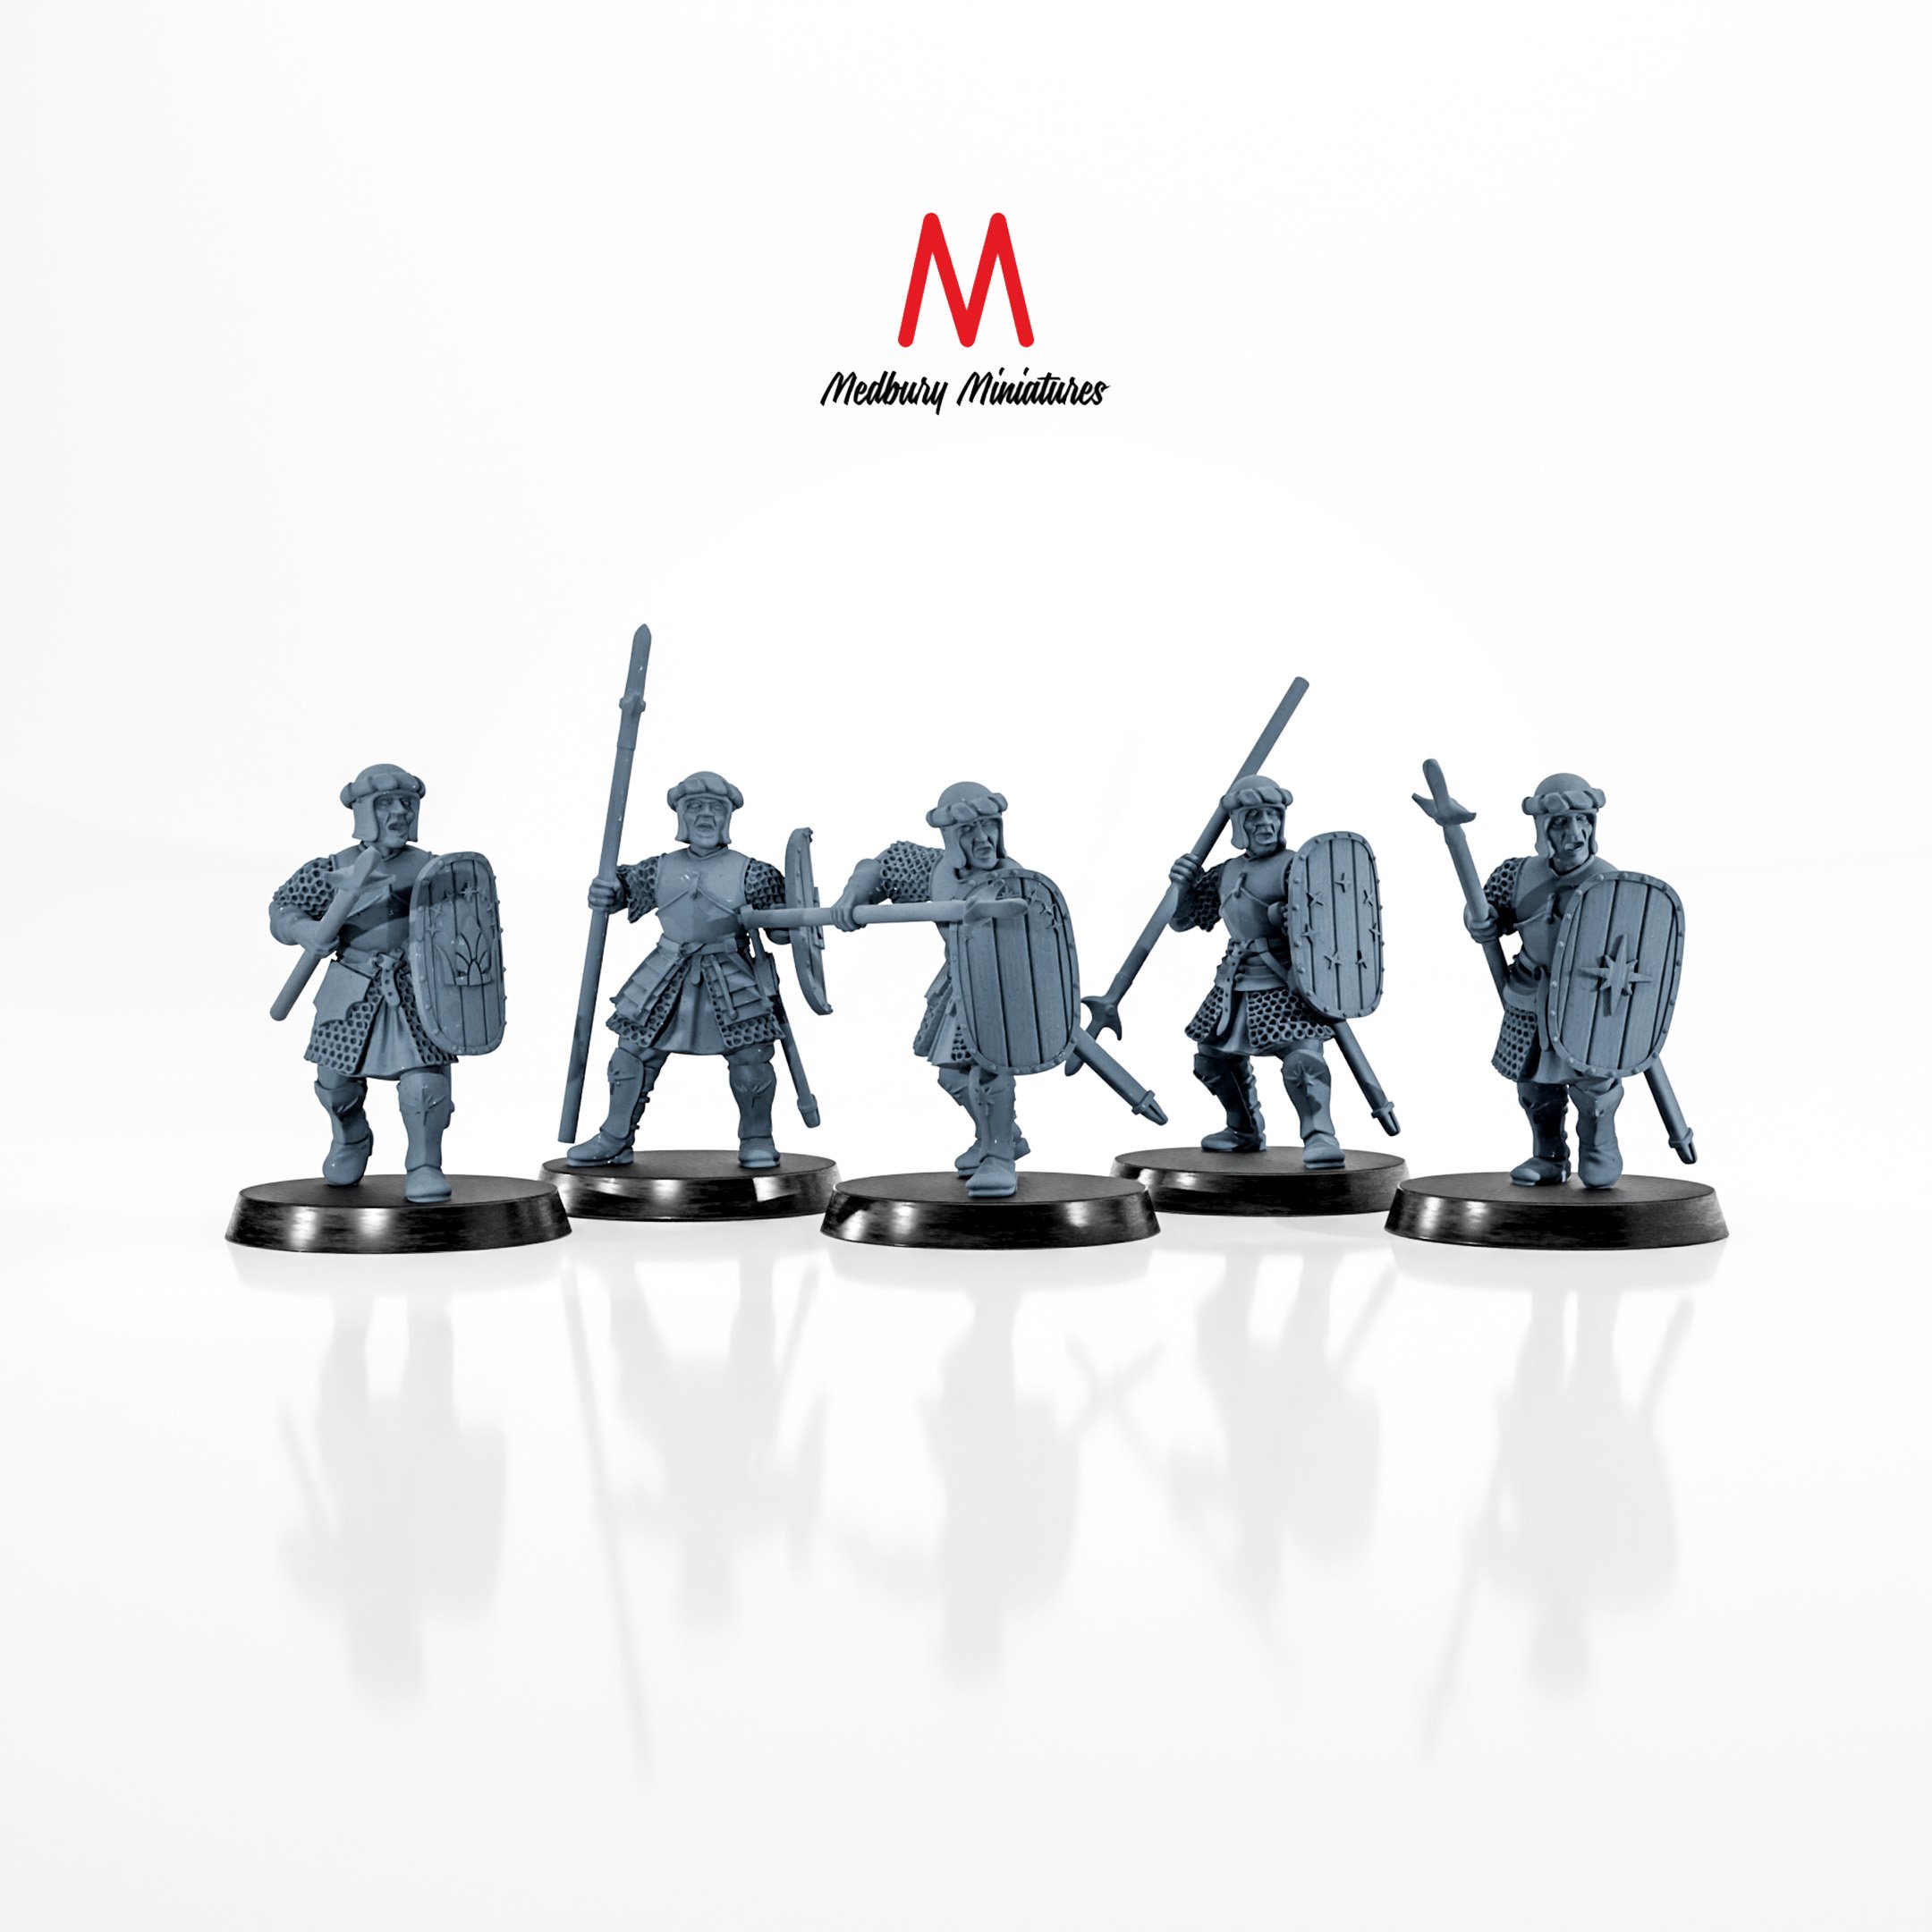 Arnaudin Posable Spearmen wargaming miniatures designed by Medbury Miniatures, 3D printed by Forgemaster Miniatures for fantasy skirmish games